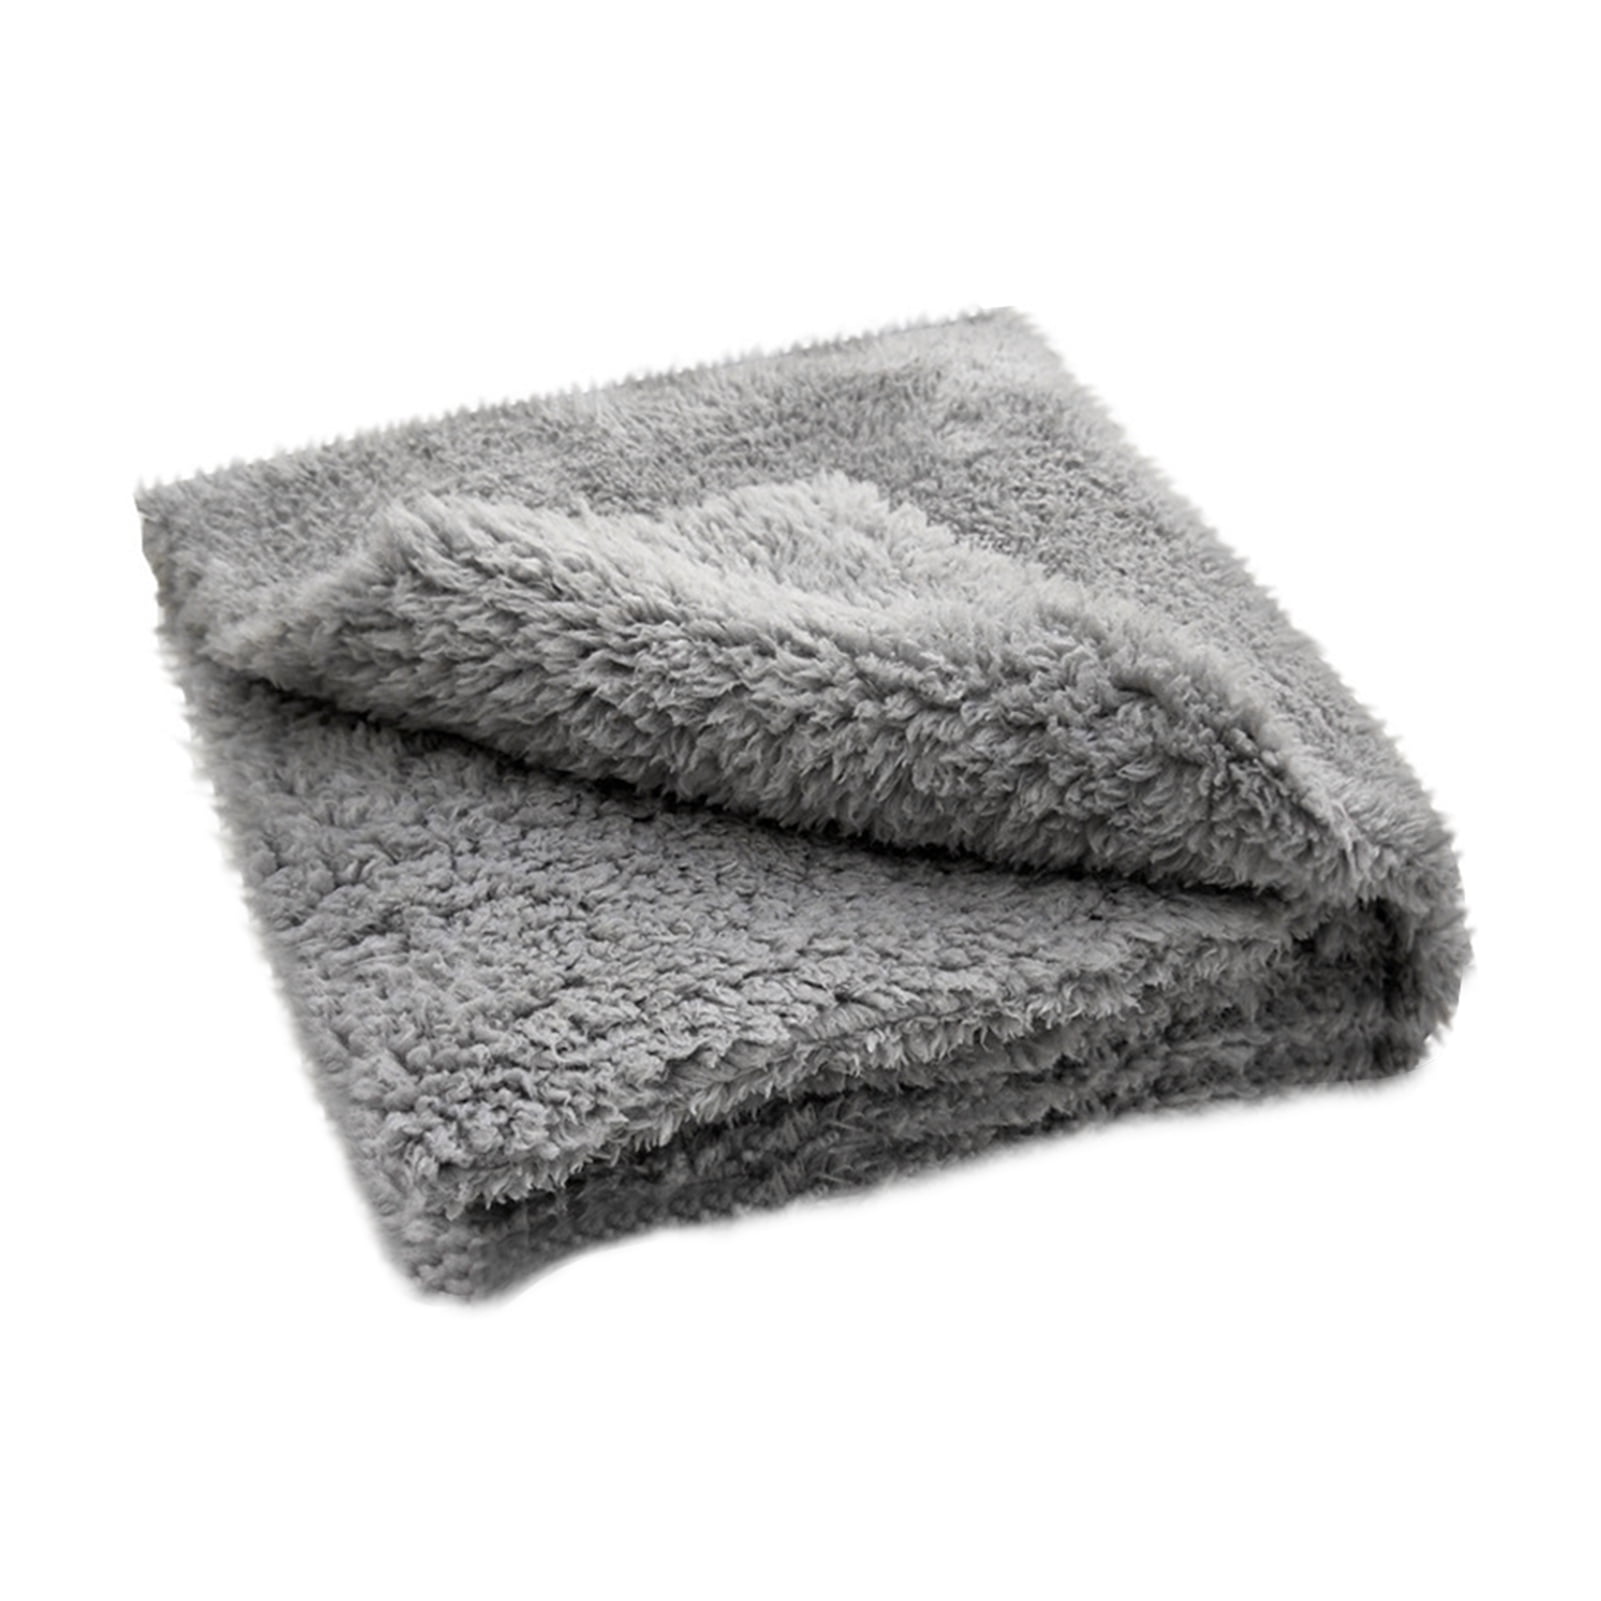 3 X Large Microfibre Absorbent Dry Towel Car Kitchen Washing Clean Cloth 40x40cm 